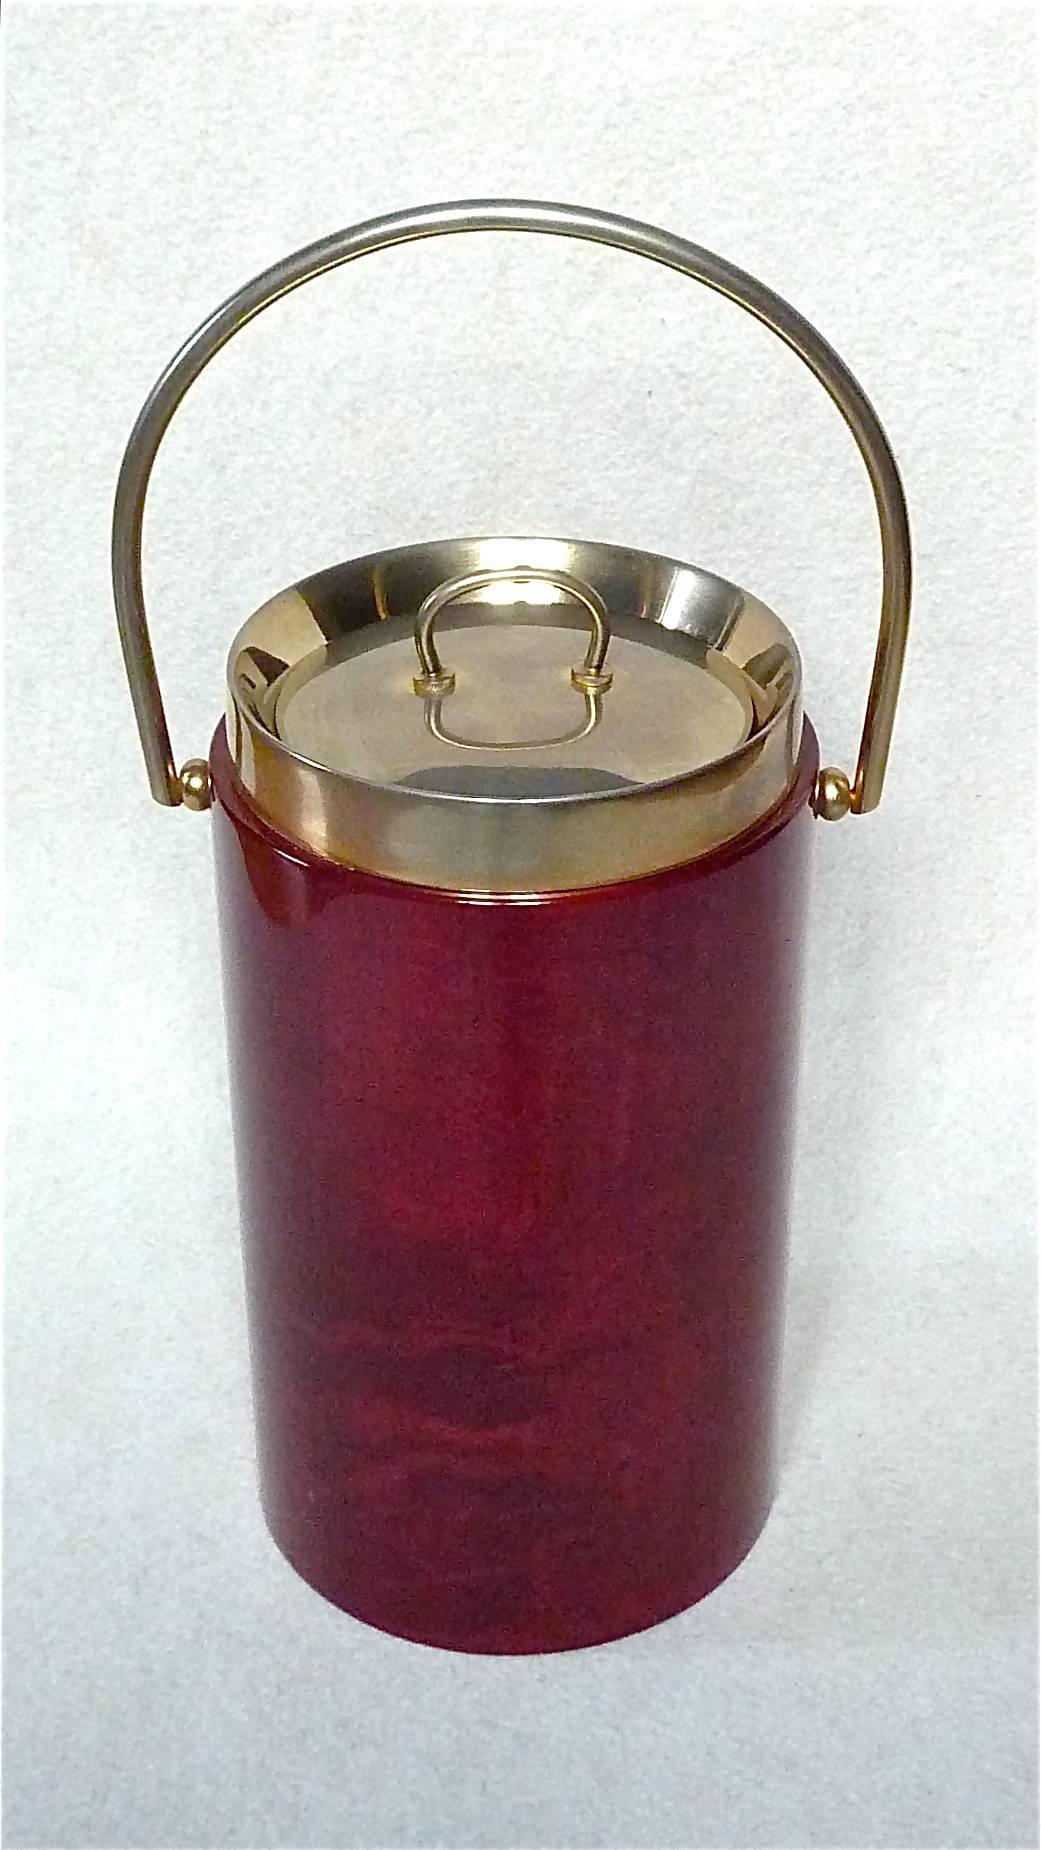 Rare and tall ice bucket or wine / champagne cooler with handle designed by Aldo Tura Milano, Italy, circa 1960-1970. It is made of a wooden corpus covered with a oxblood-red colored and varnished parchment or goatskin, a metal handle and lid and a